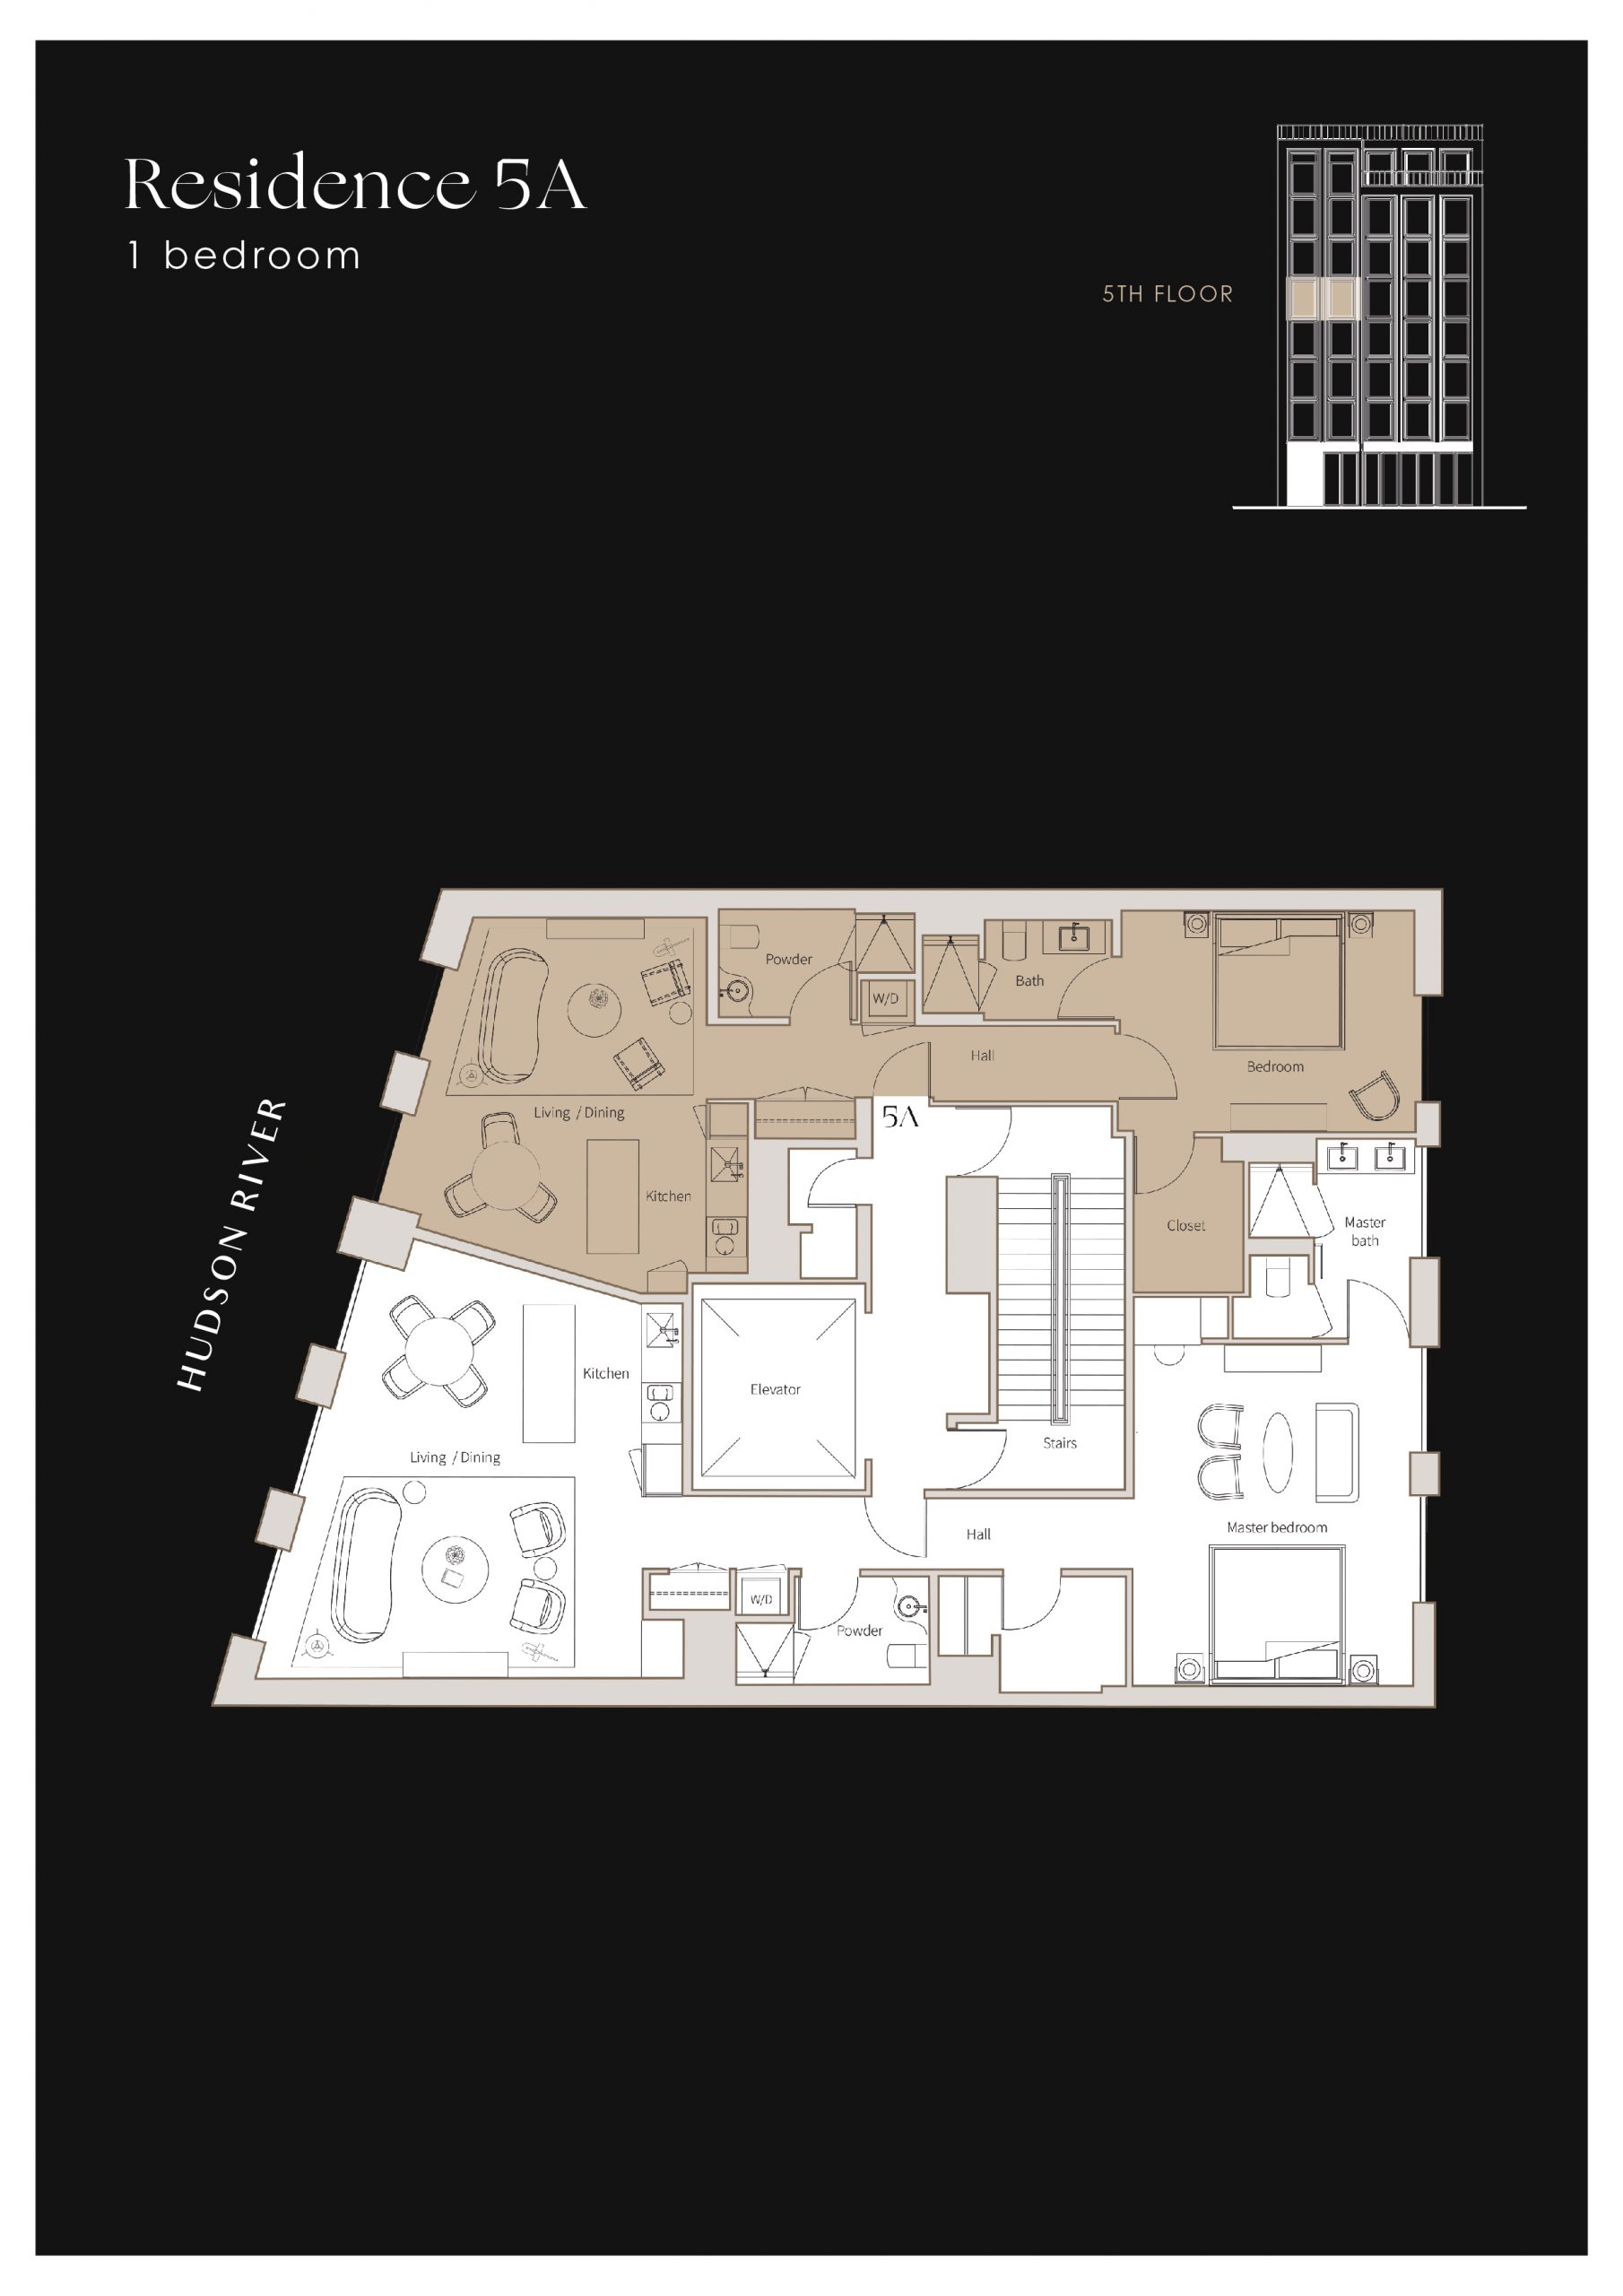 Plan of apartment Residence 5A